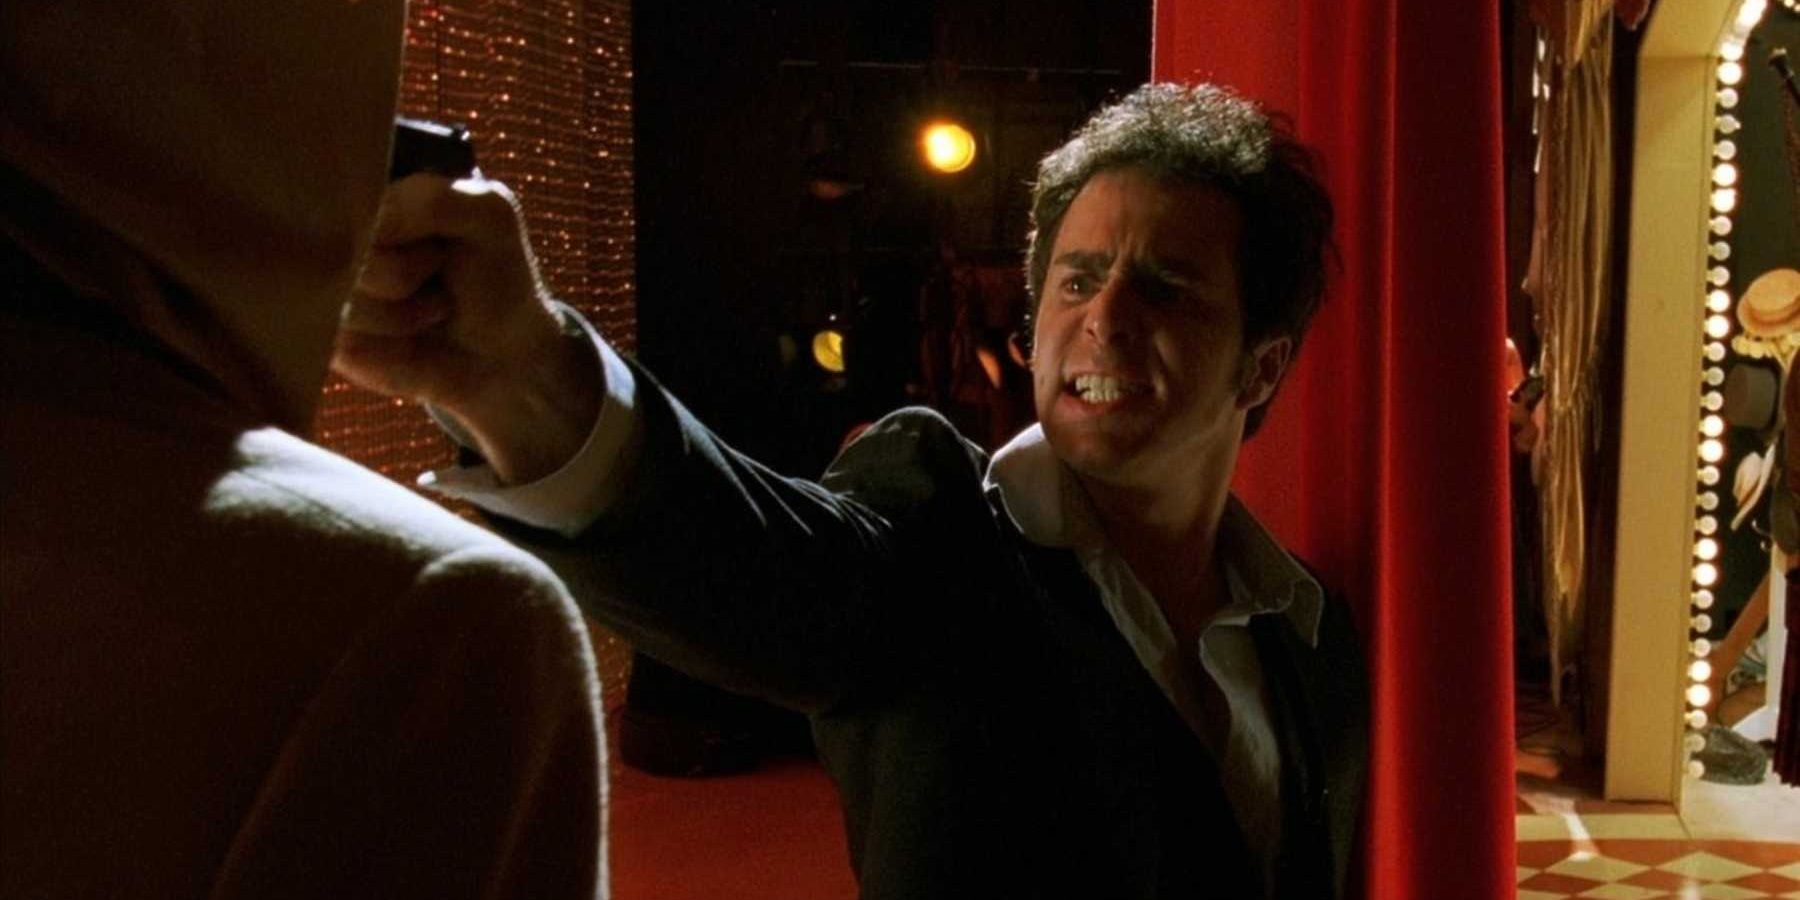 Chuck points a gun behind the stage in Confessions of a Dangerous Mind